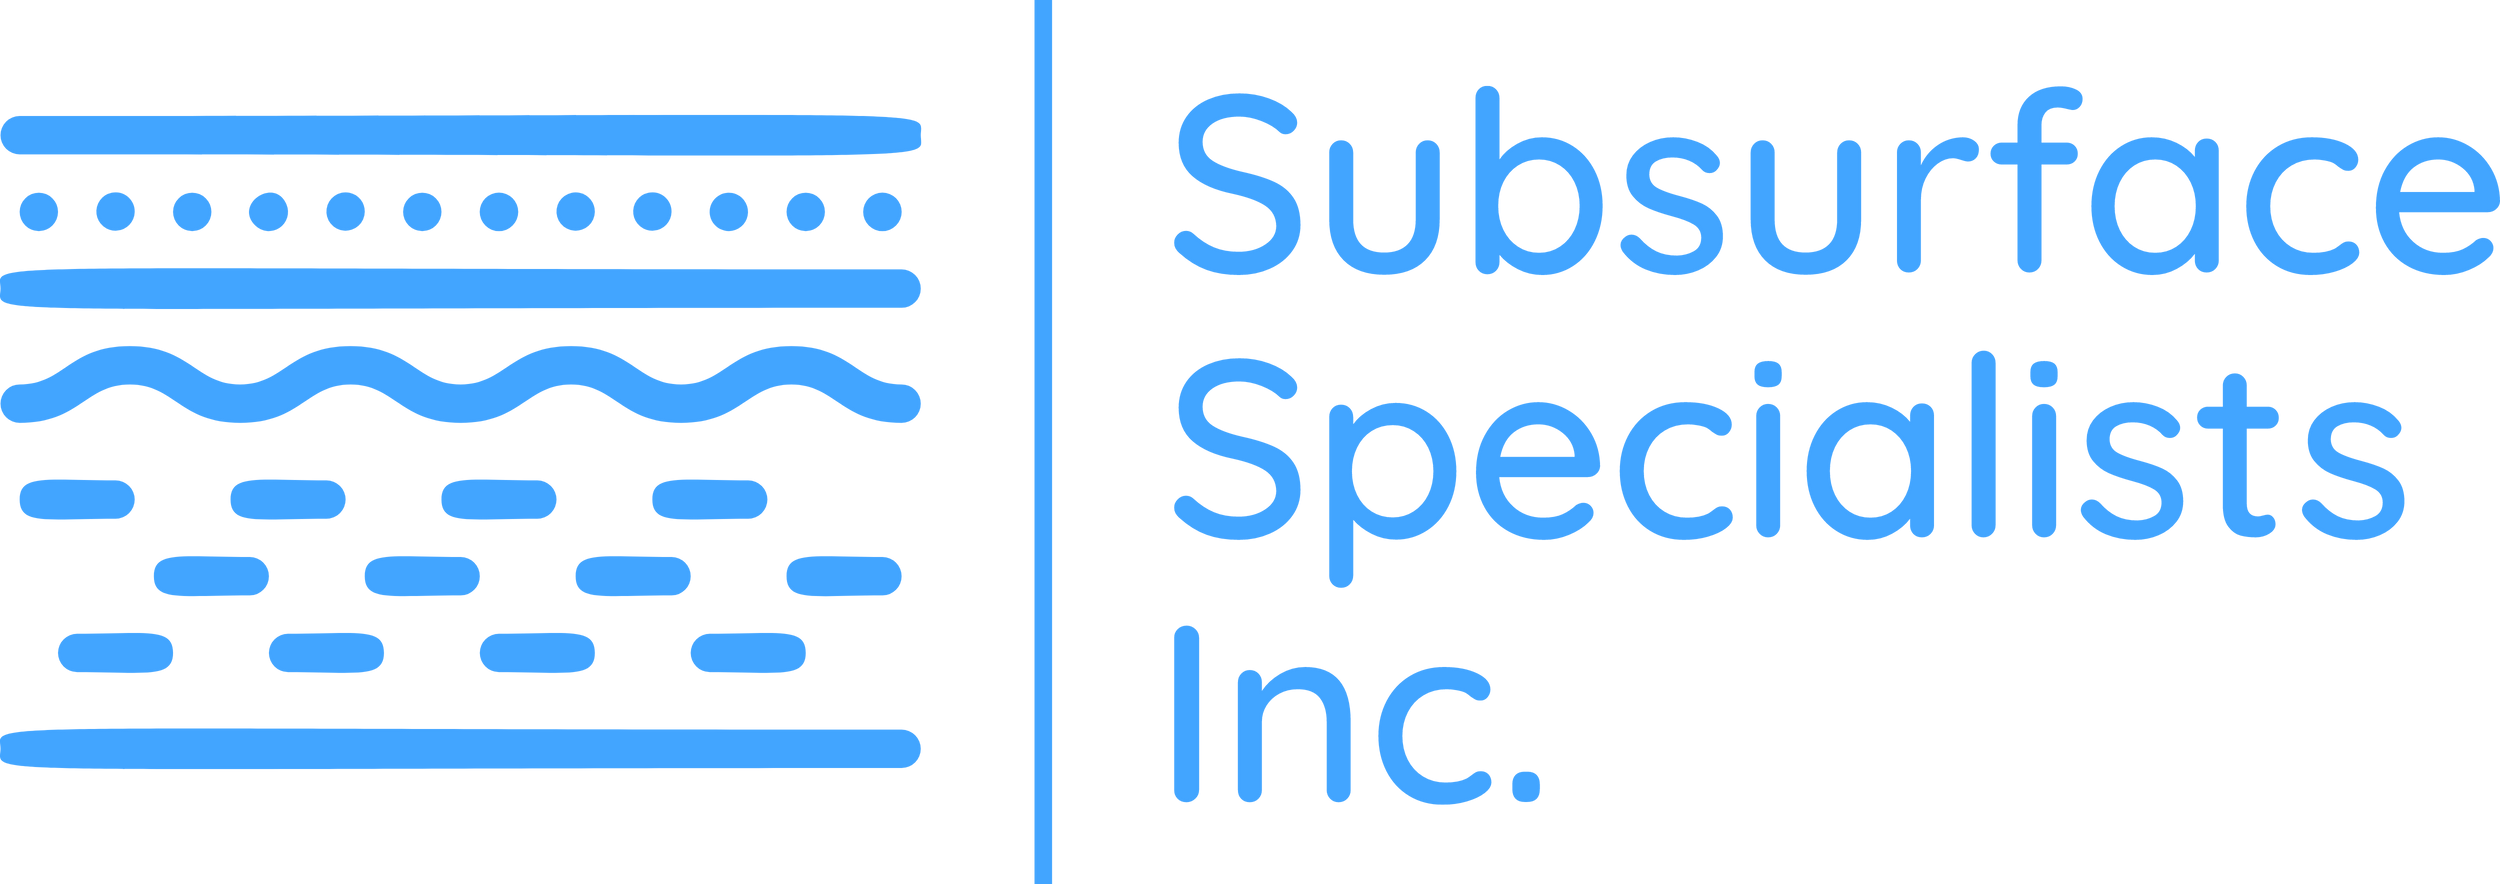 Subsurface Specialists Inc. - blendnewyork